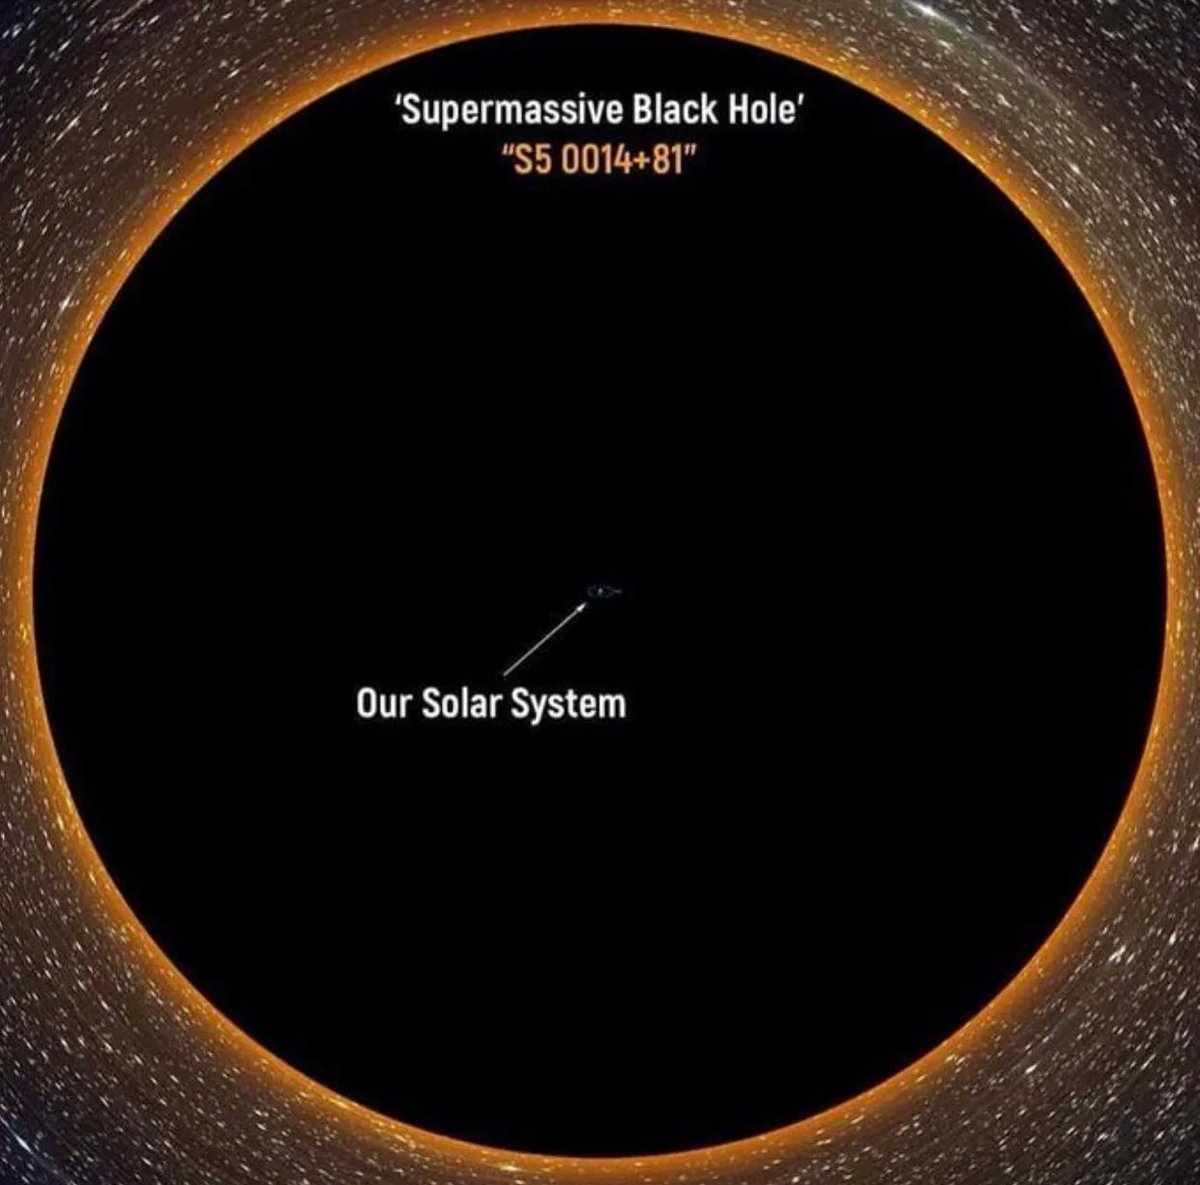 RT @UniverCurious: The largest known Supermassive Black Hole compared to our solar system. https://t.co/qg4I1SeQap